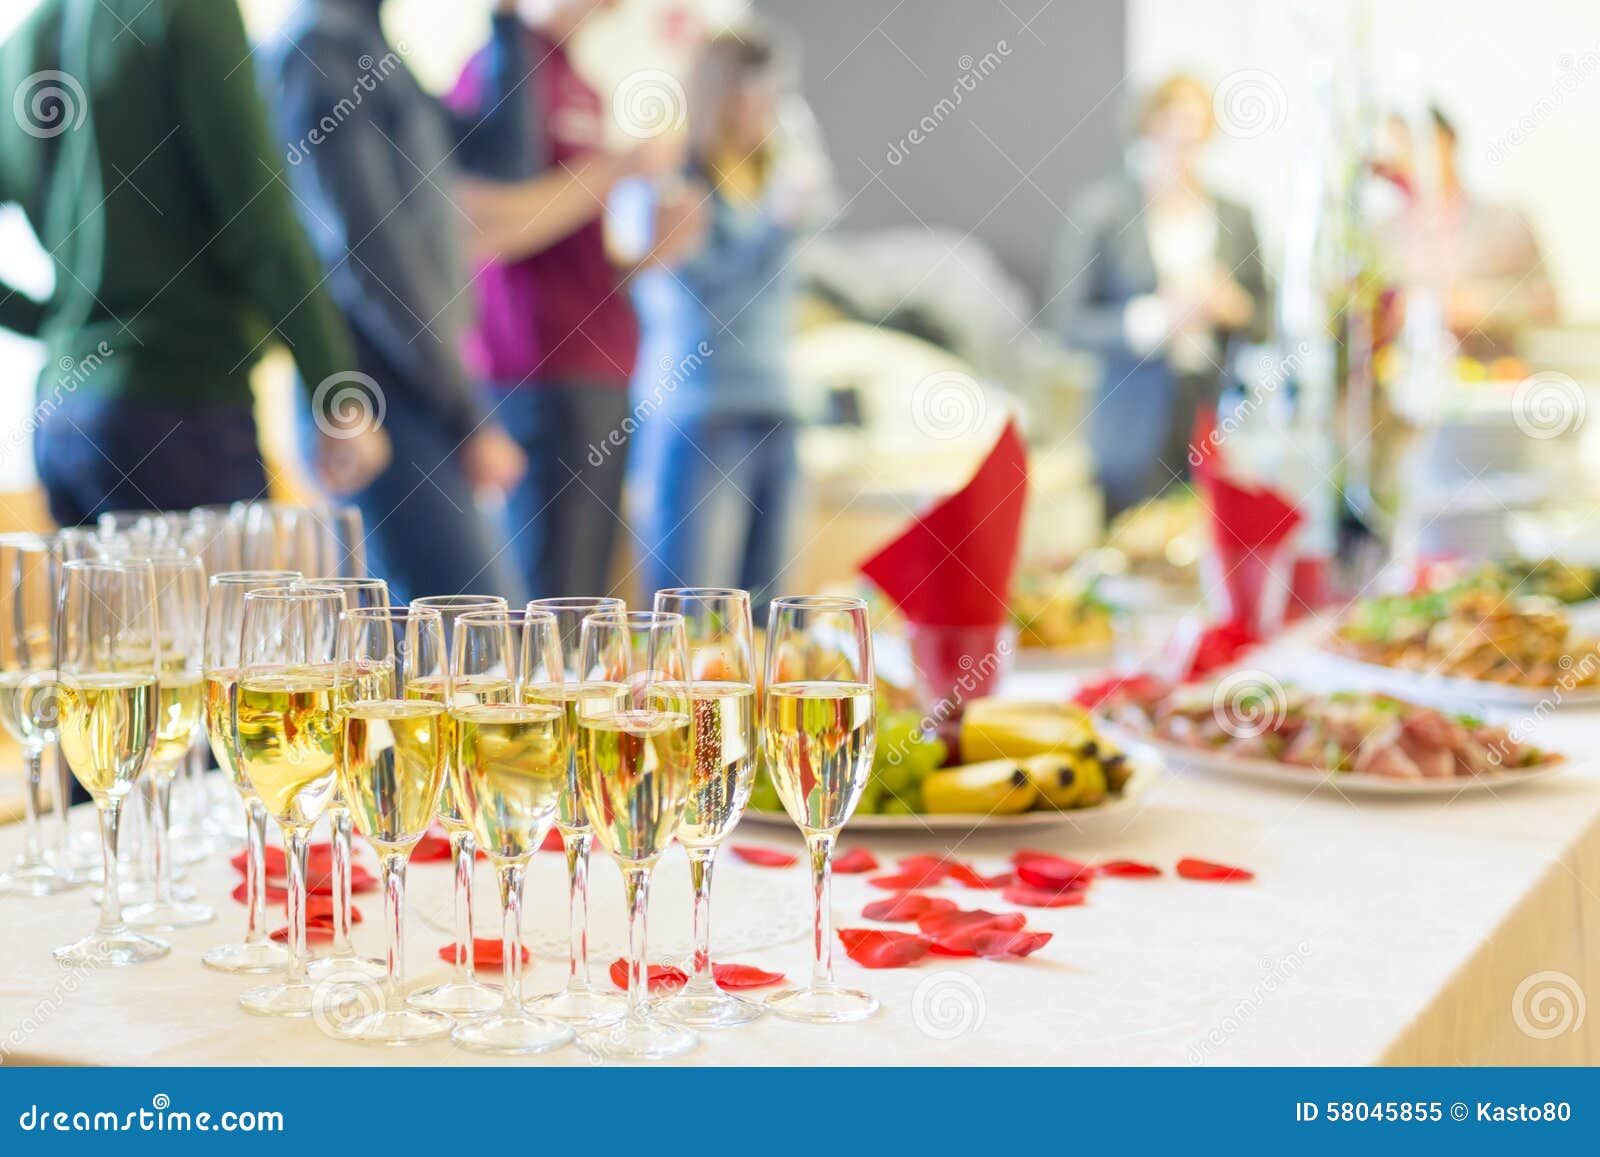 banquet event. champagne on table.